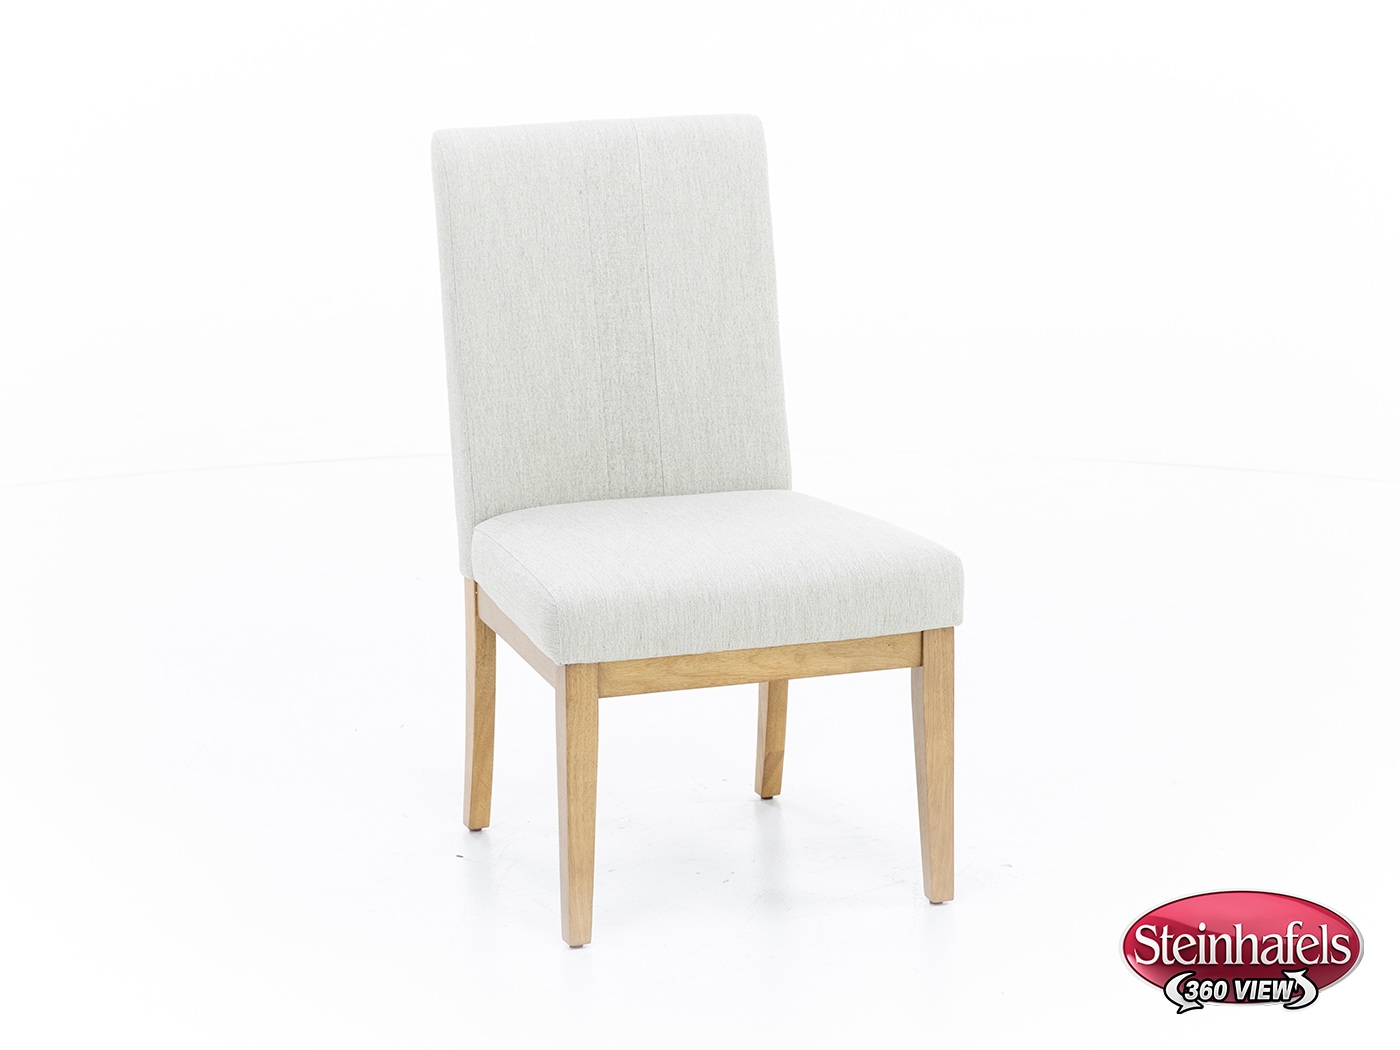 rivr wood grain inch standard seat height side chair  image   